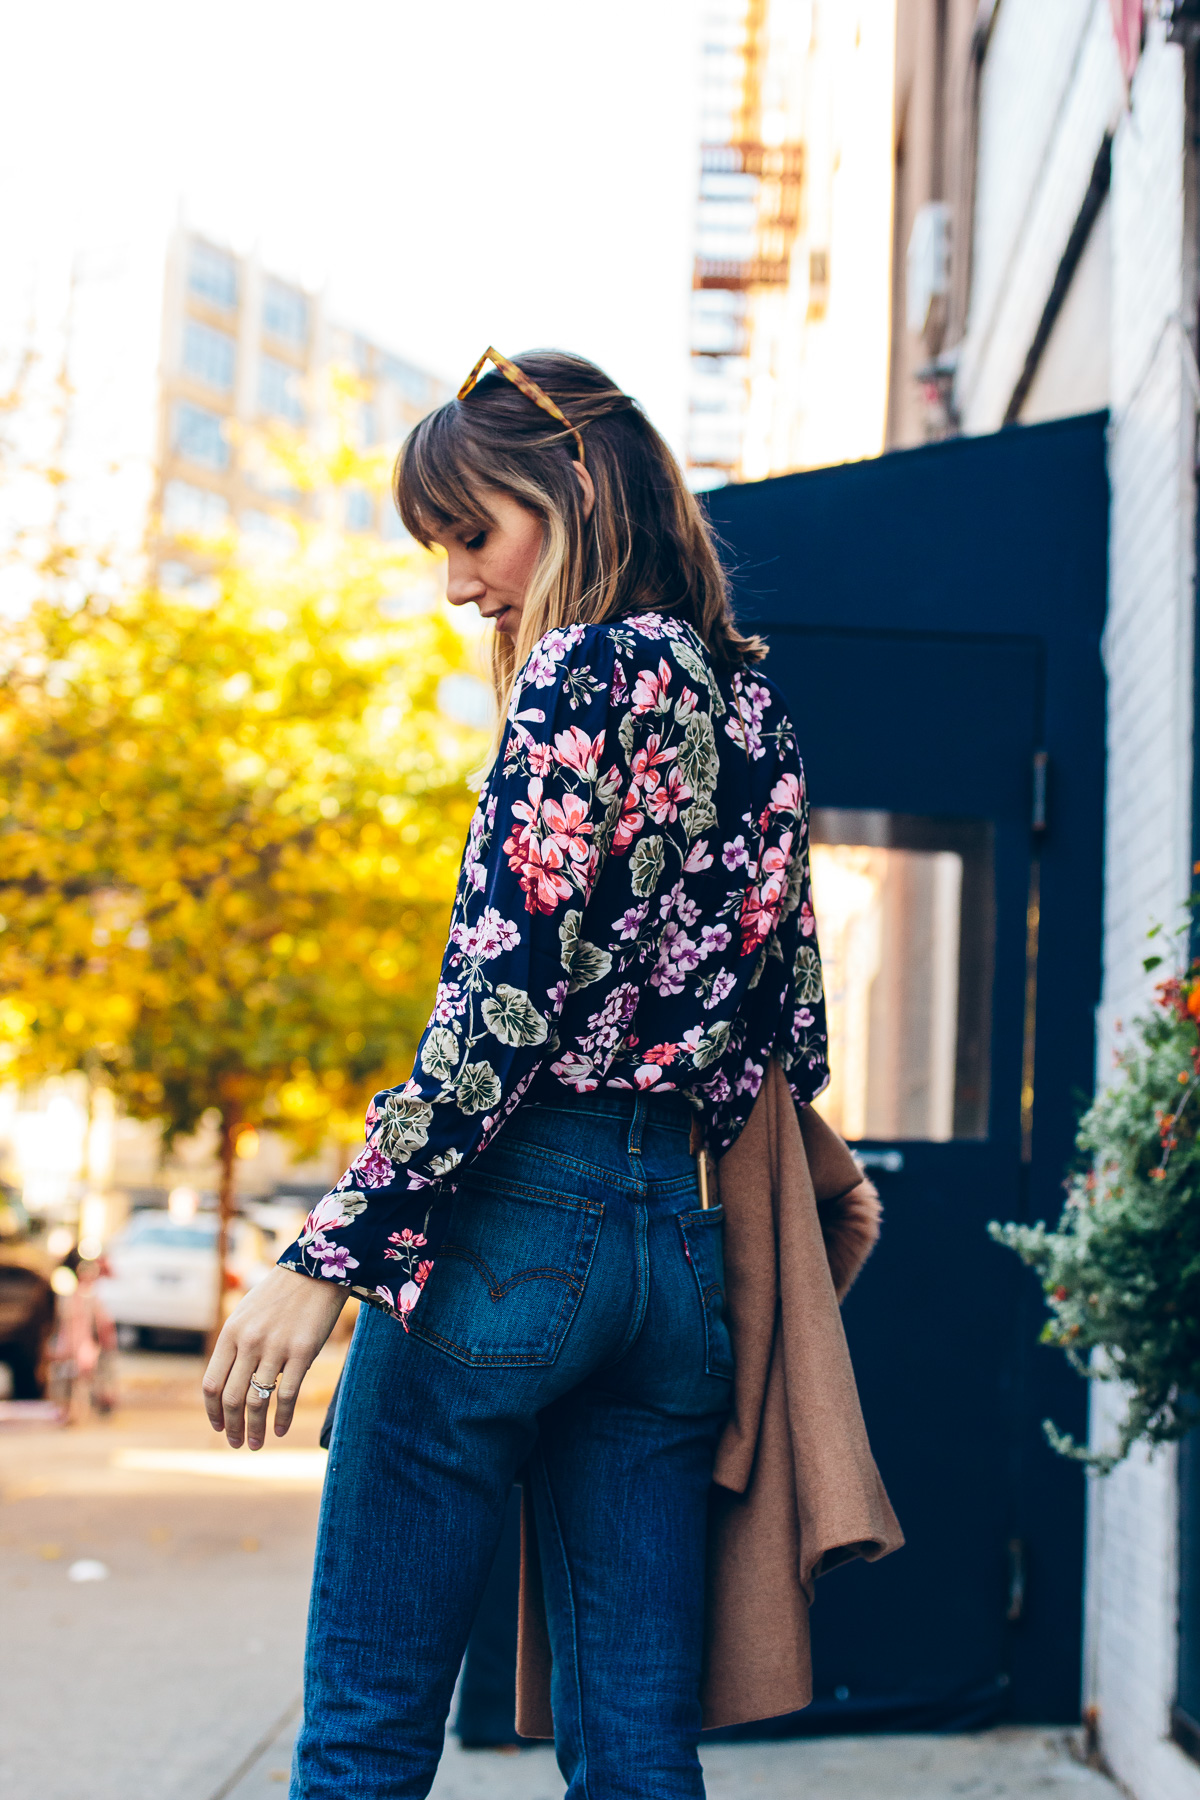 how to wear florals in fall